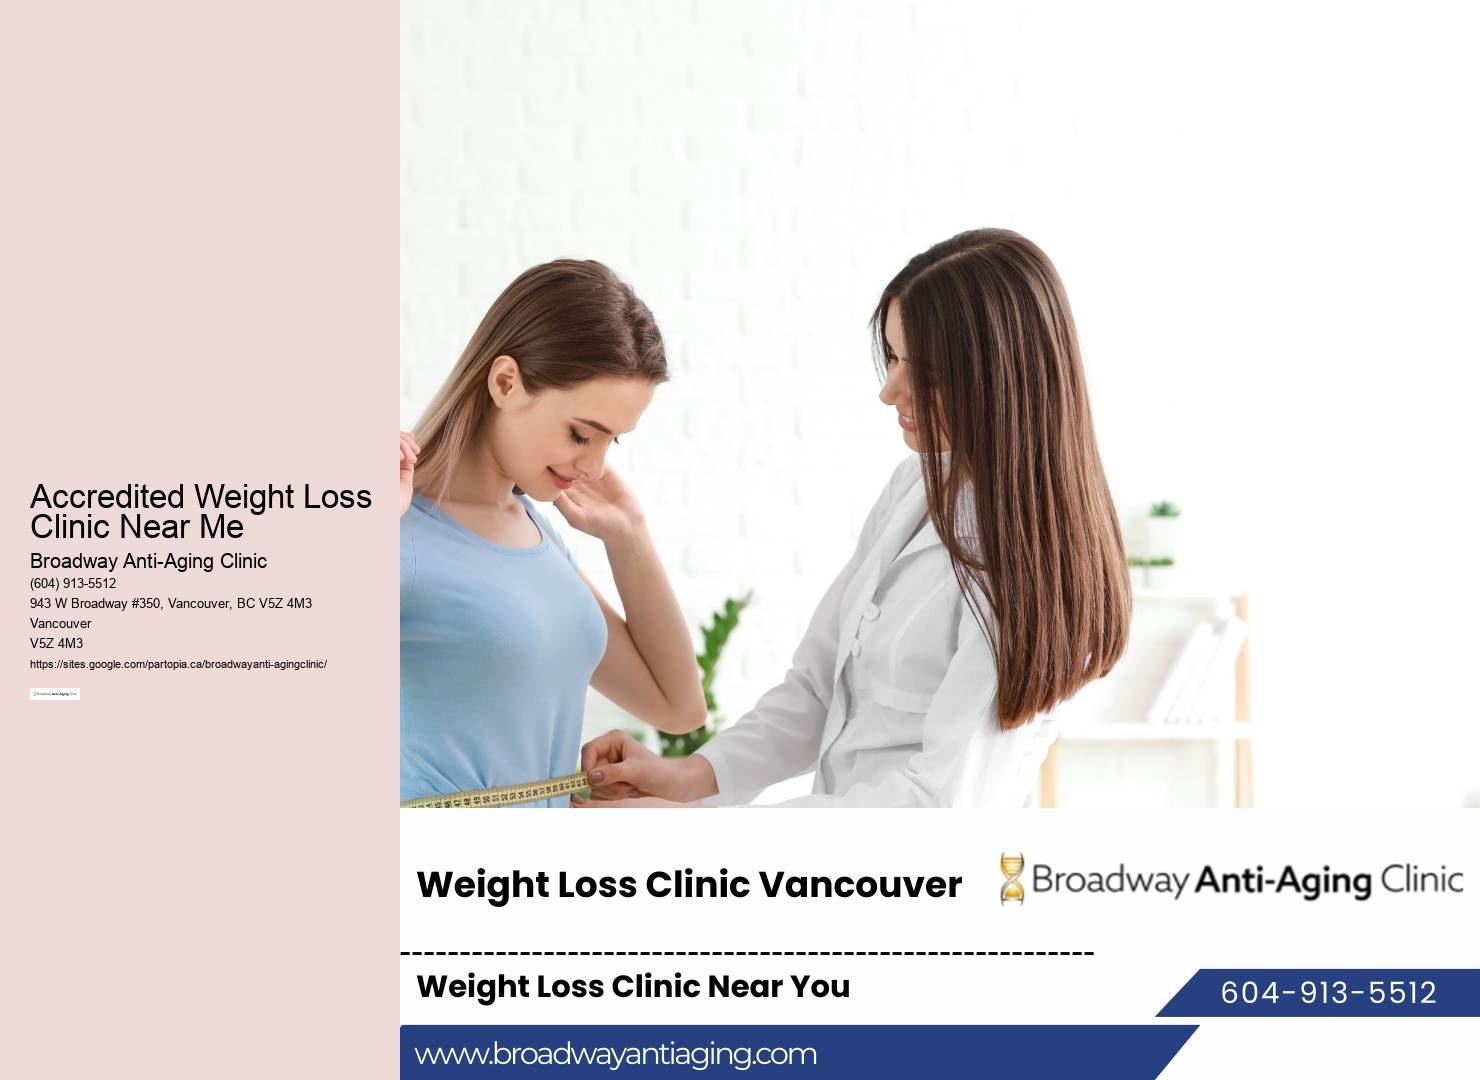 Weight loss clinic North Vancouver affordable prices